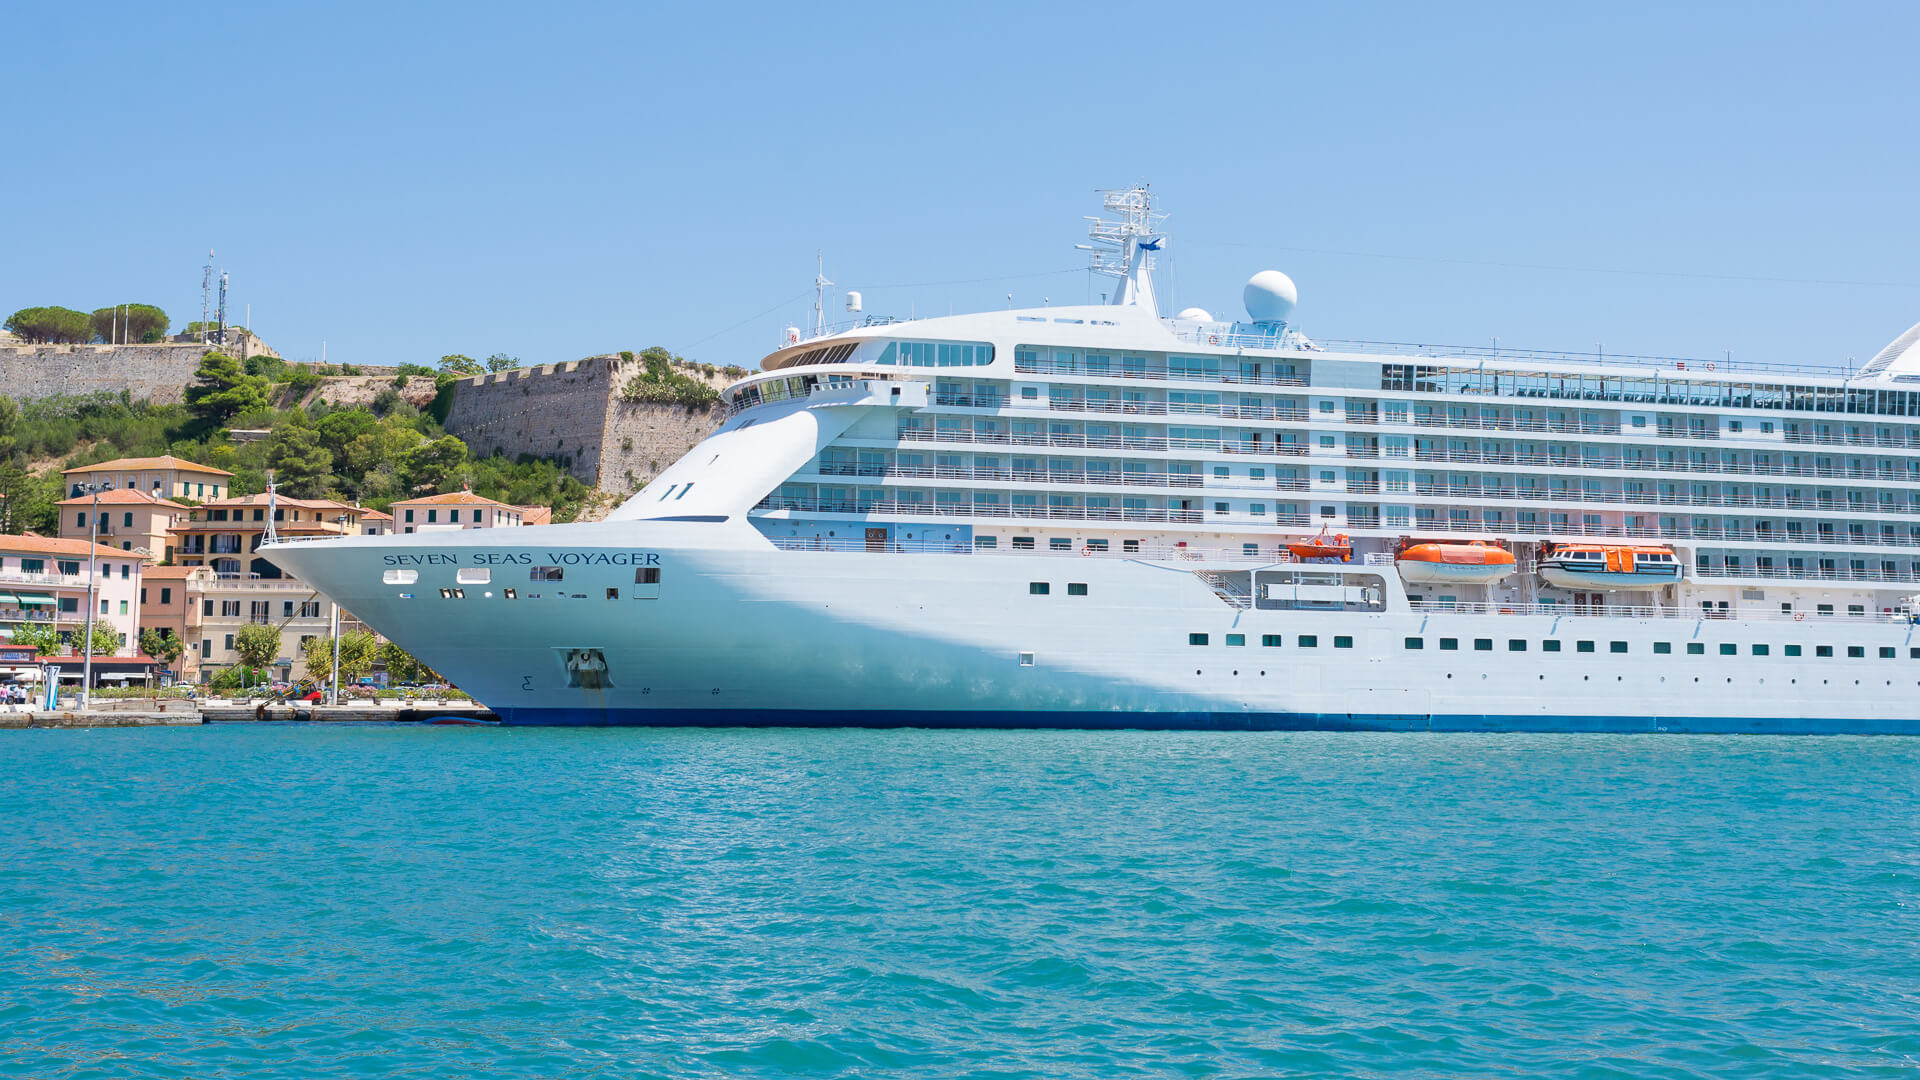 <p>If you want to save serious cash, avoid traveling on brand-new cruises, which cost more, McDaniel said. “Older ships are often a bit smaller than newer megaships and don’t generally have all of the bells and whistles of ships just hitting the market. But [they] still offer a fantastic vacation option at a lower price point,” she said.</p>